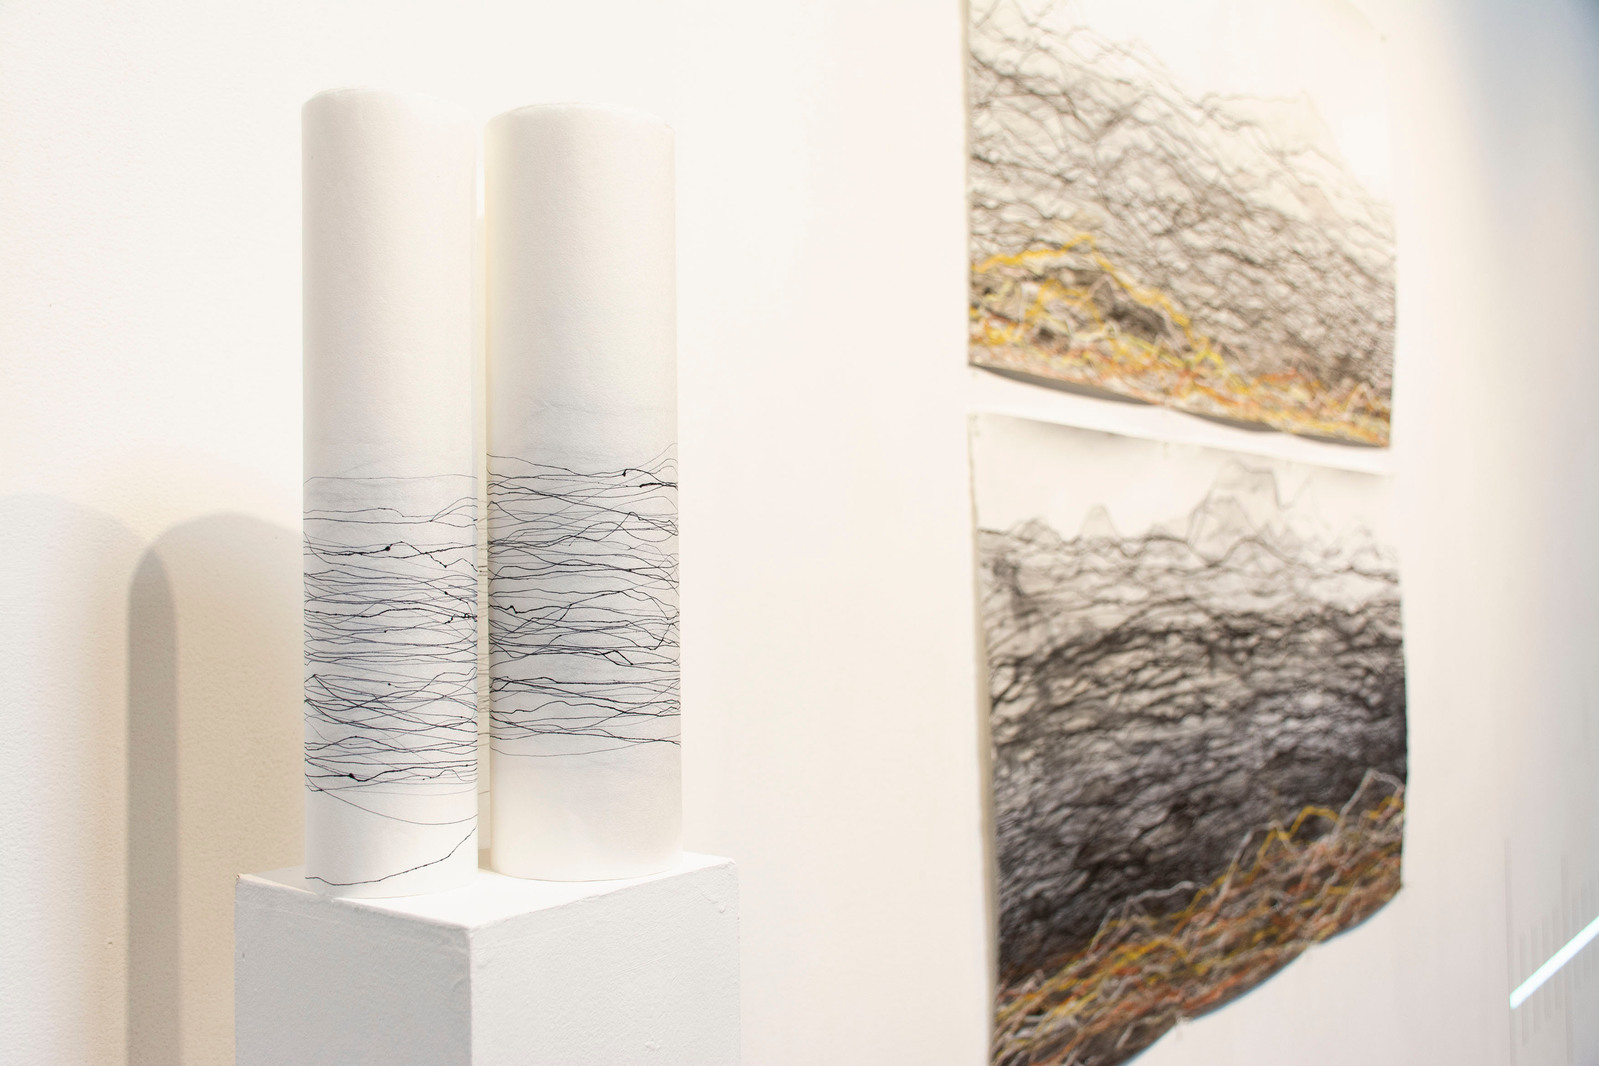 drawings of abstract lines on the wall and curled up on a pedestal